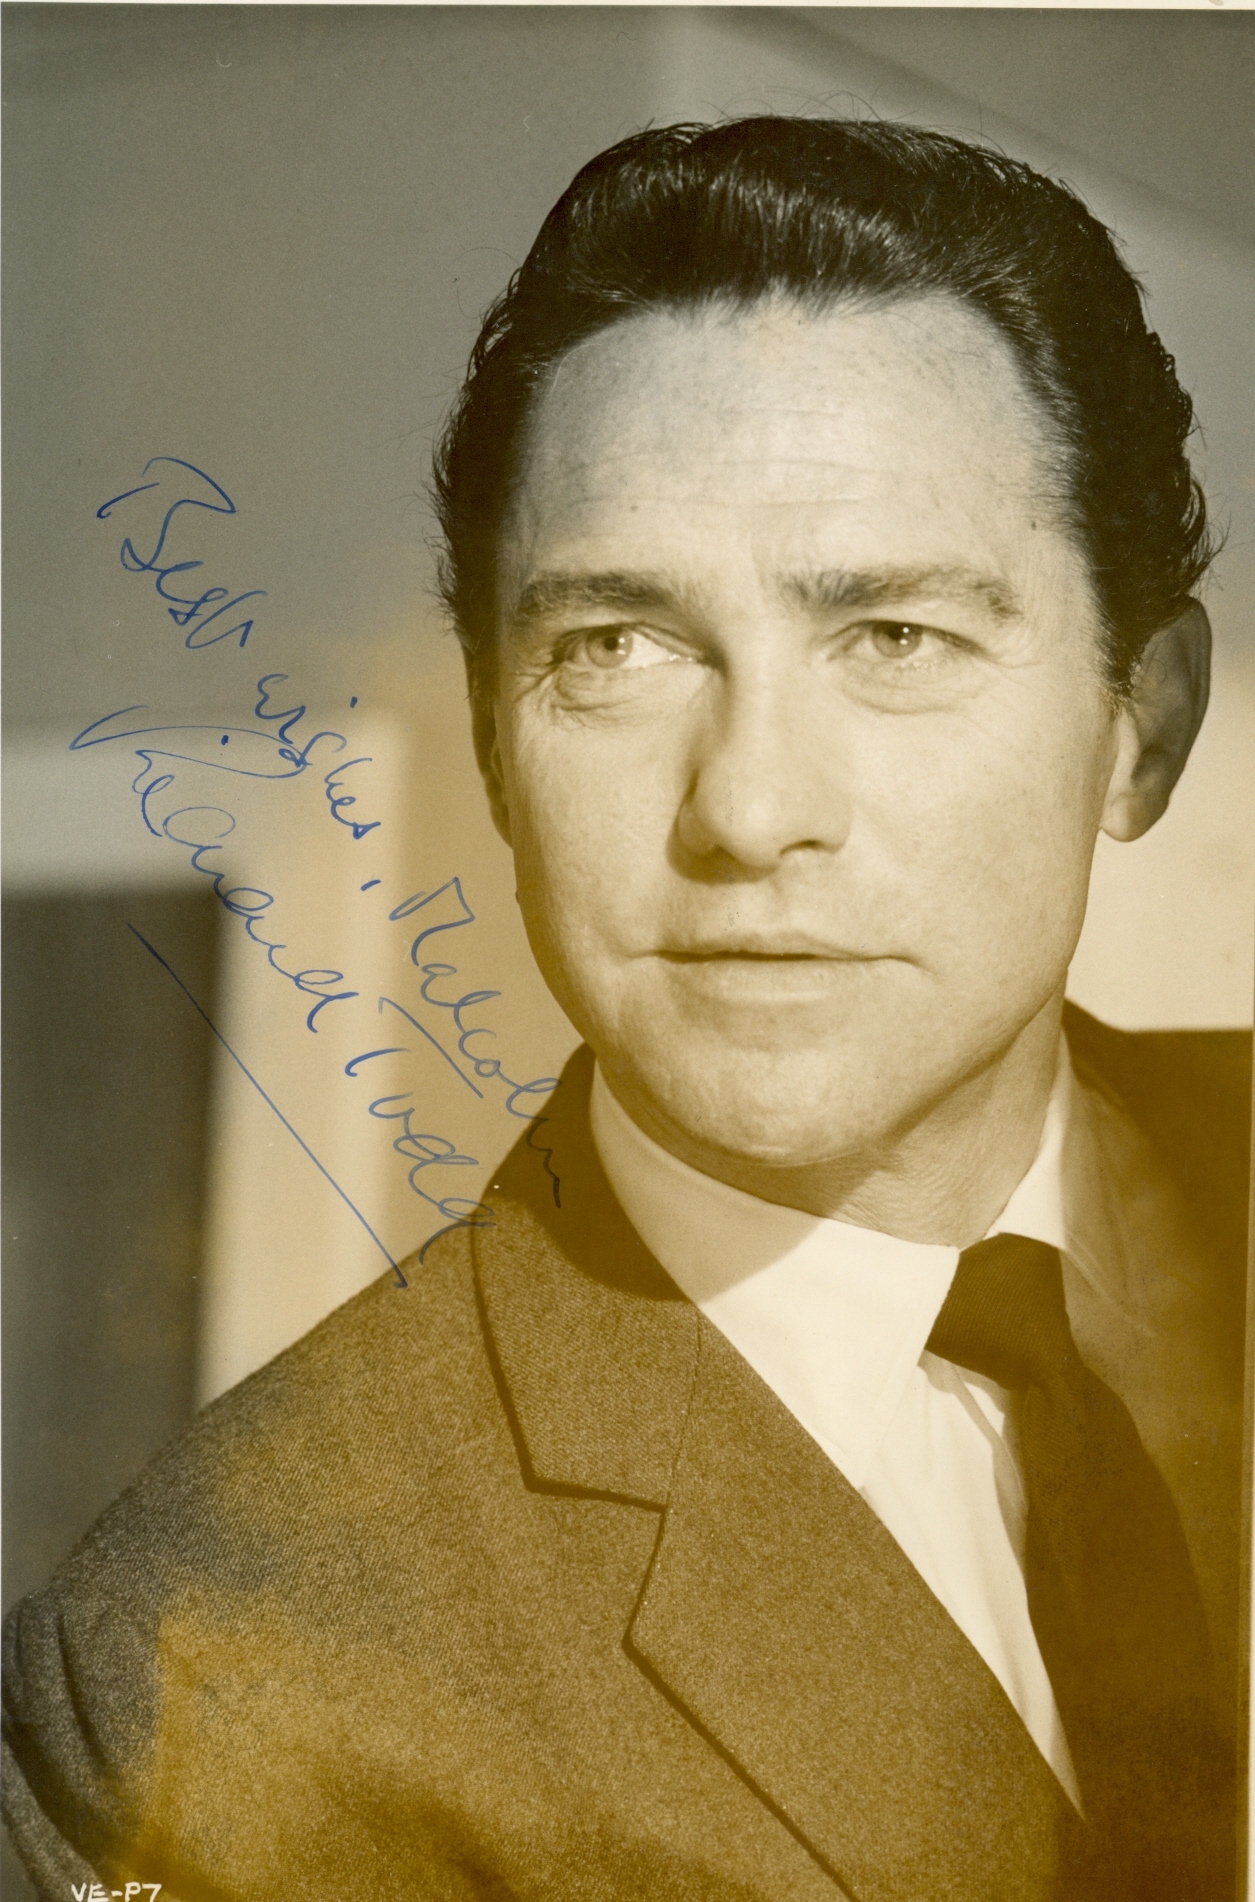 ACTORS: Selection of vintage signed 8 x 10 photographs by various film actors comprising Farley